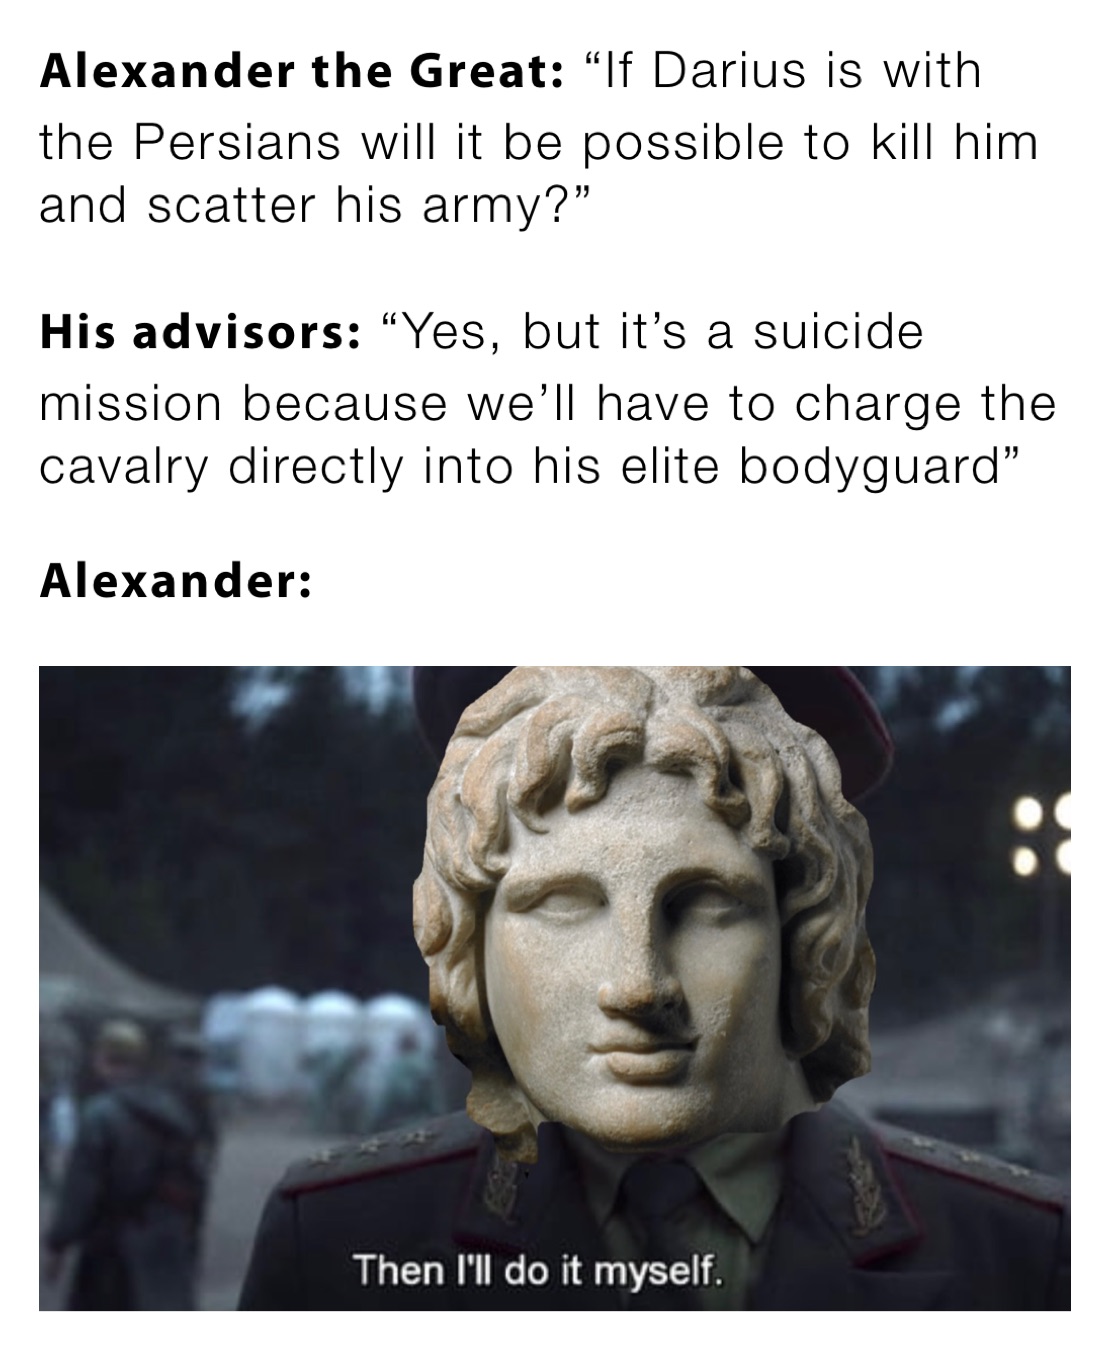 Alexander the Great: “If Darius is with the Persians will it be possible to kill him and scatter his army?”

His advisors: “Yes, but it’s a suicide mission because we’ll have to charge the cavalry directly into his elite bodyguard”

Alexander: